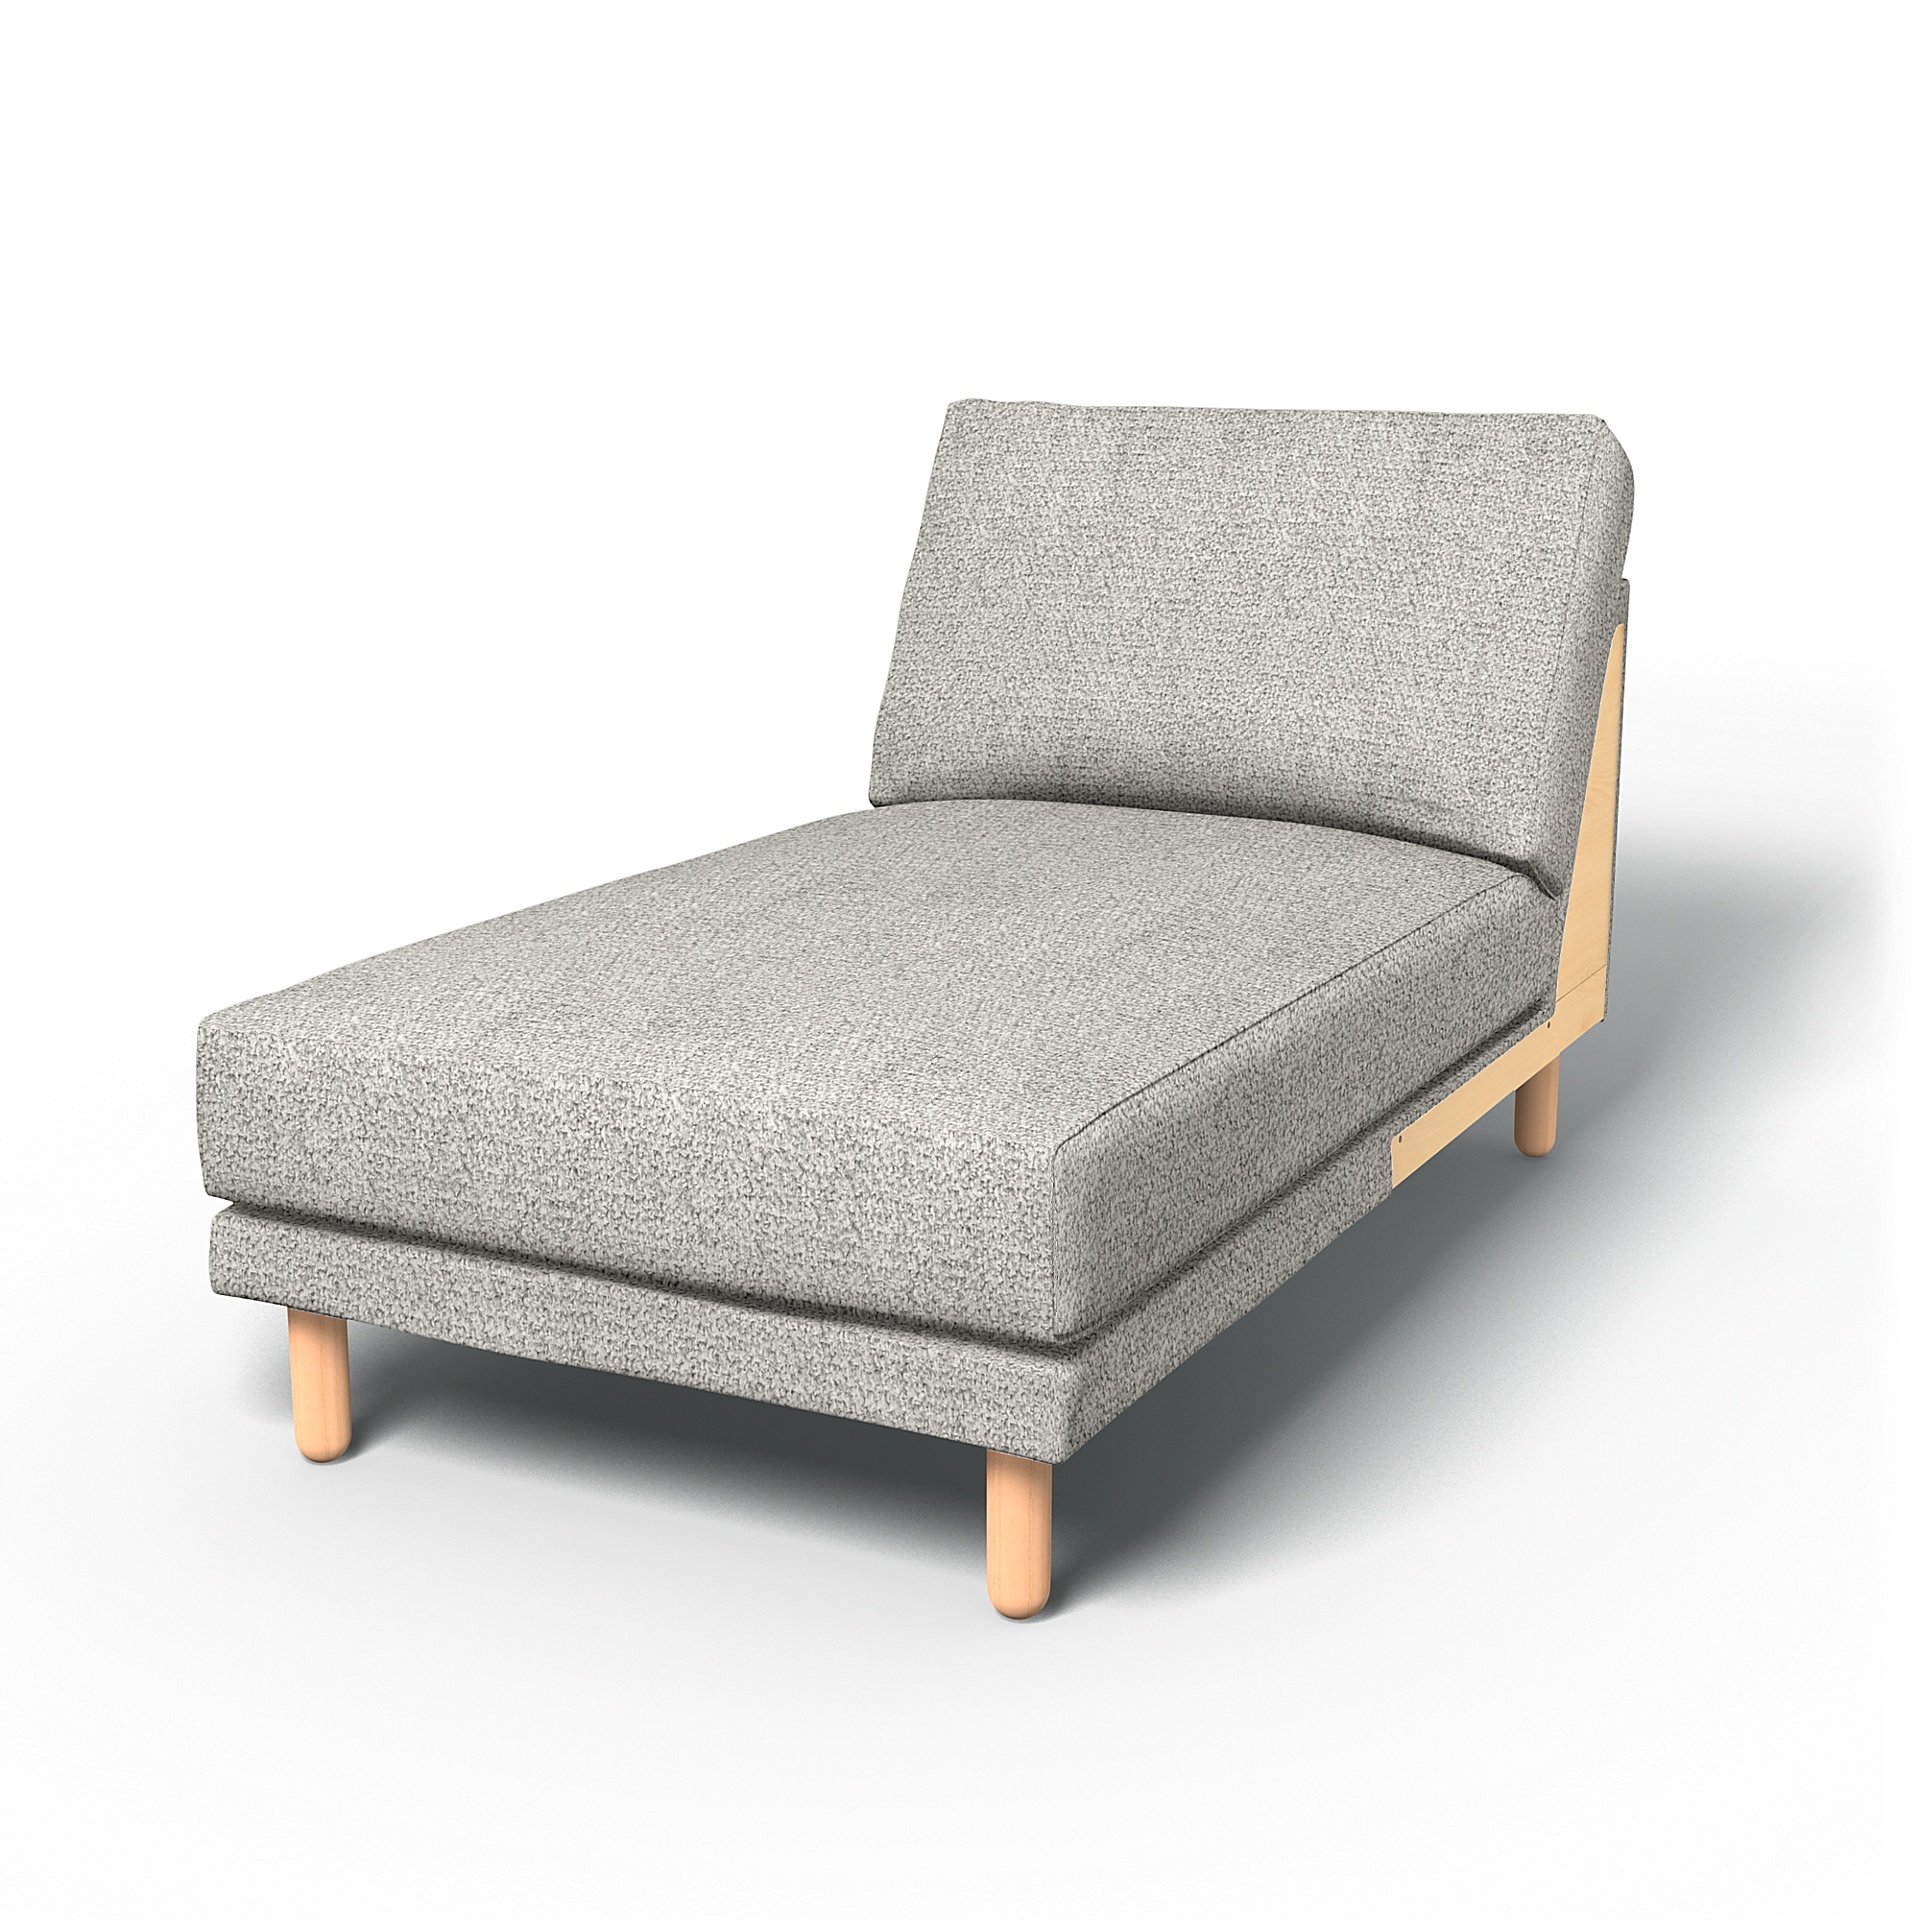 IKEA - Norsborg Chaise Longue Add-on Unit Cover, Driftwood, Boucle & Texture - Bemz